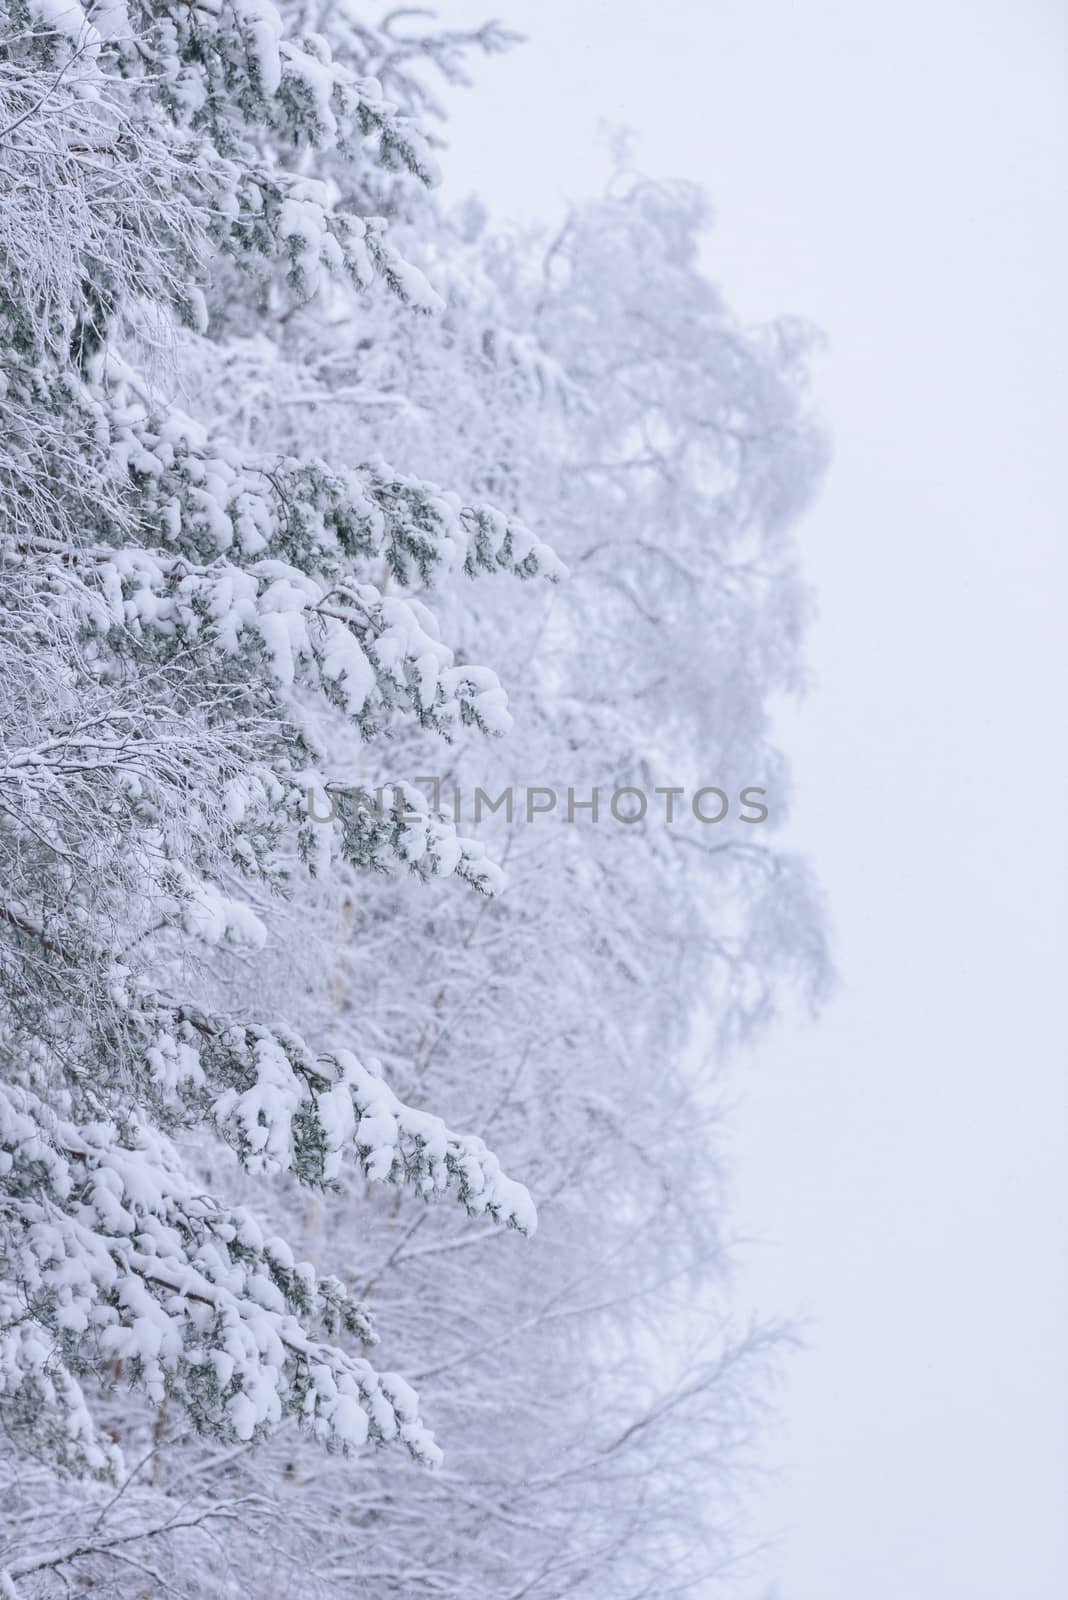 The forest has covered with heavy snow and bad weather sky in winter season at Lapland, Finland.